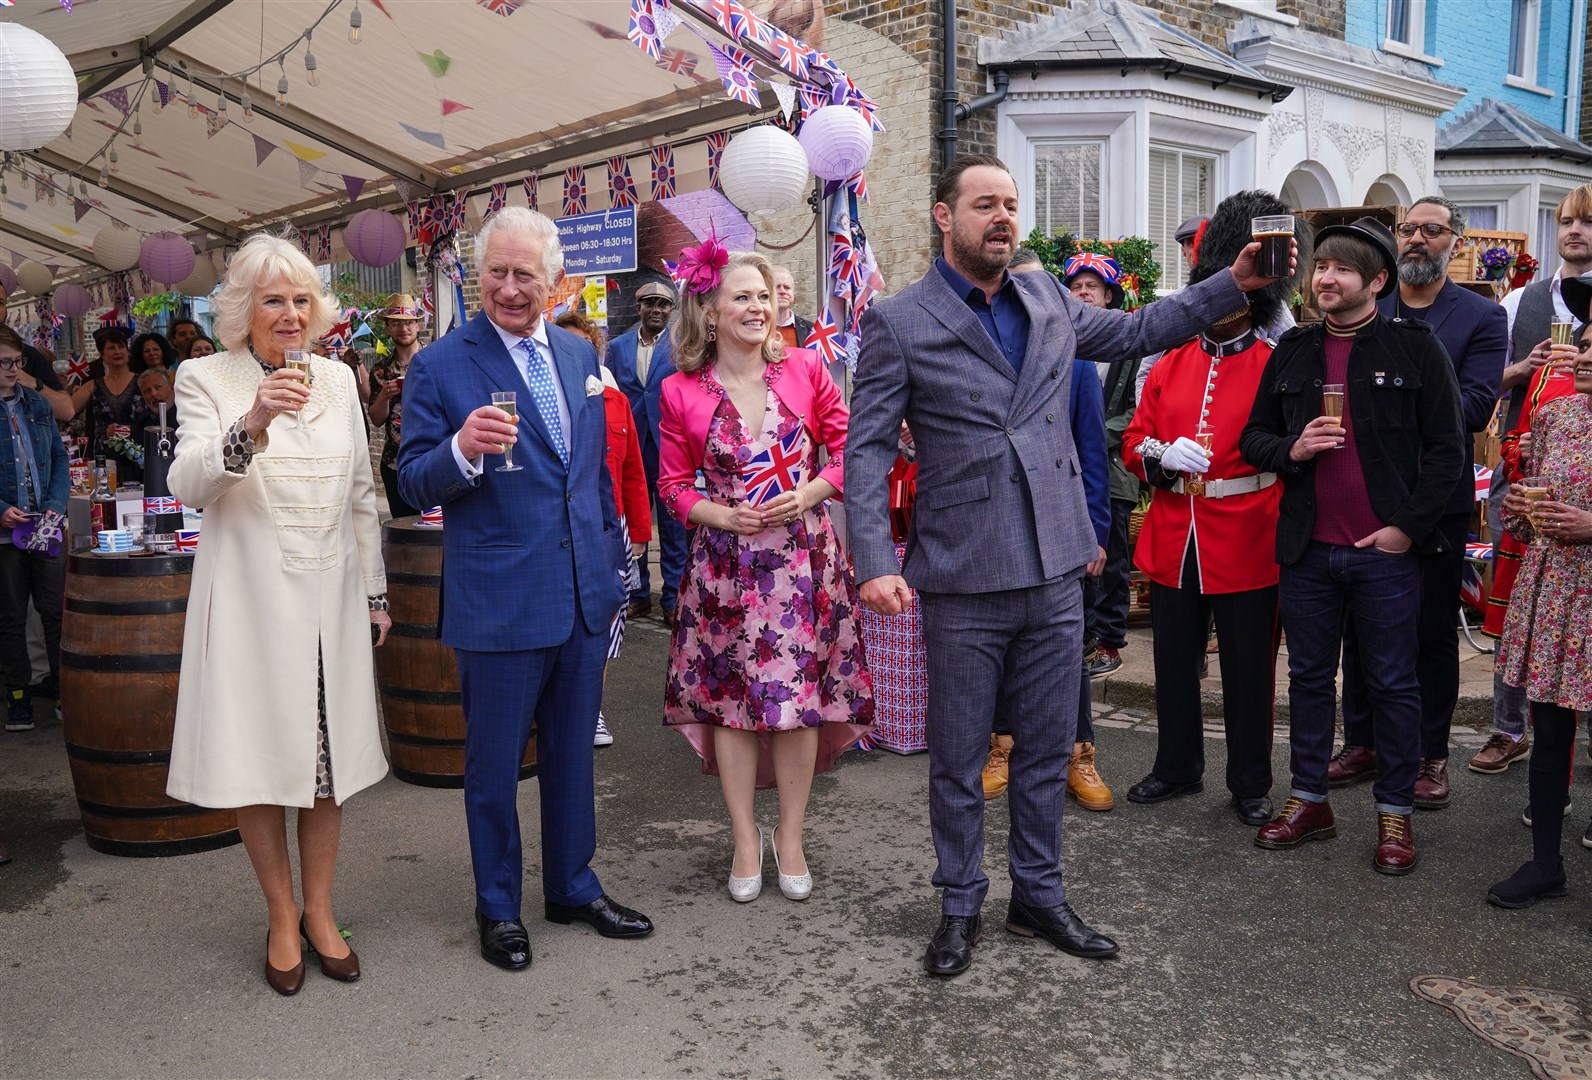 A special episode marking the Queen’s Platinum Jubilee earlier this year featured appearances from Charles and Camilla (BBC/PA)